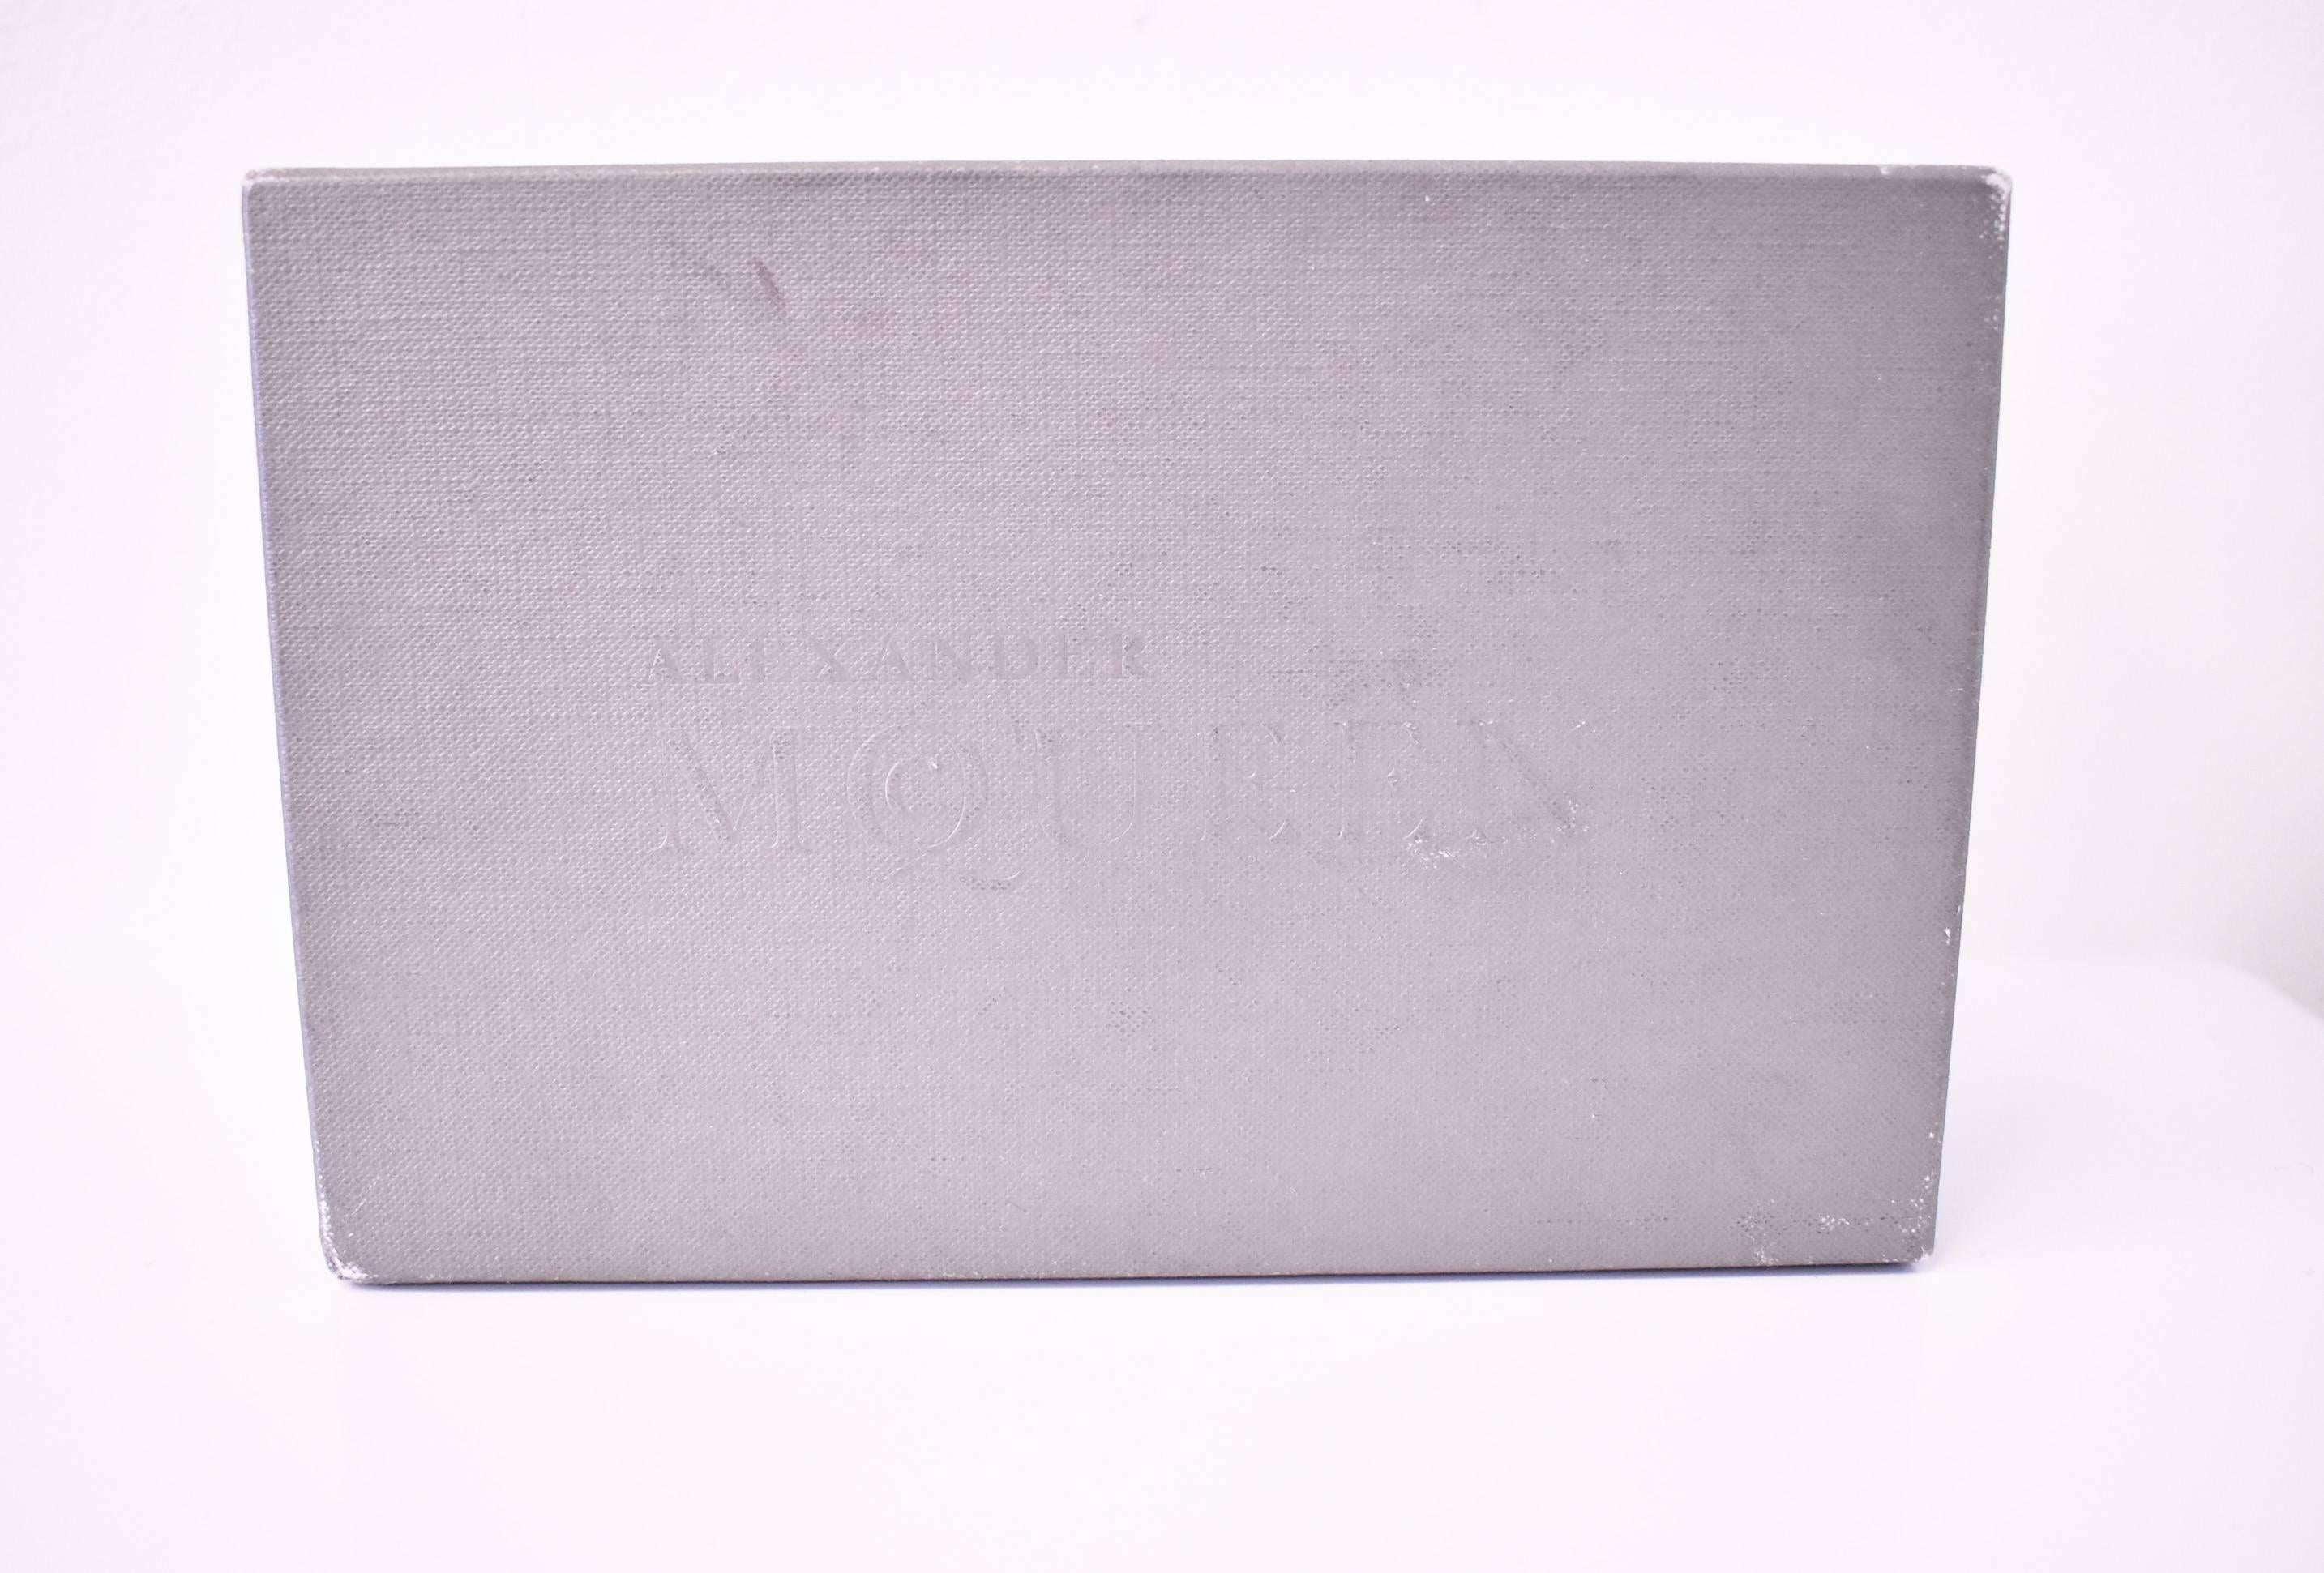 Gray Alexander McQueen White Leather with Whipstitched Union Jack Skull Box Clutch